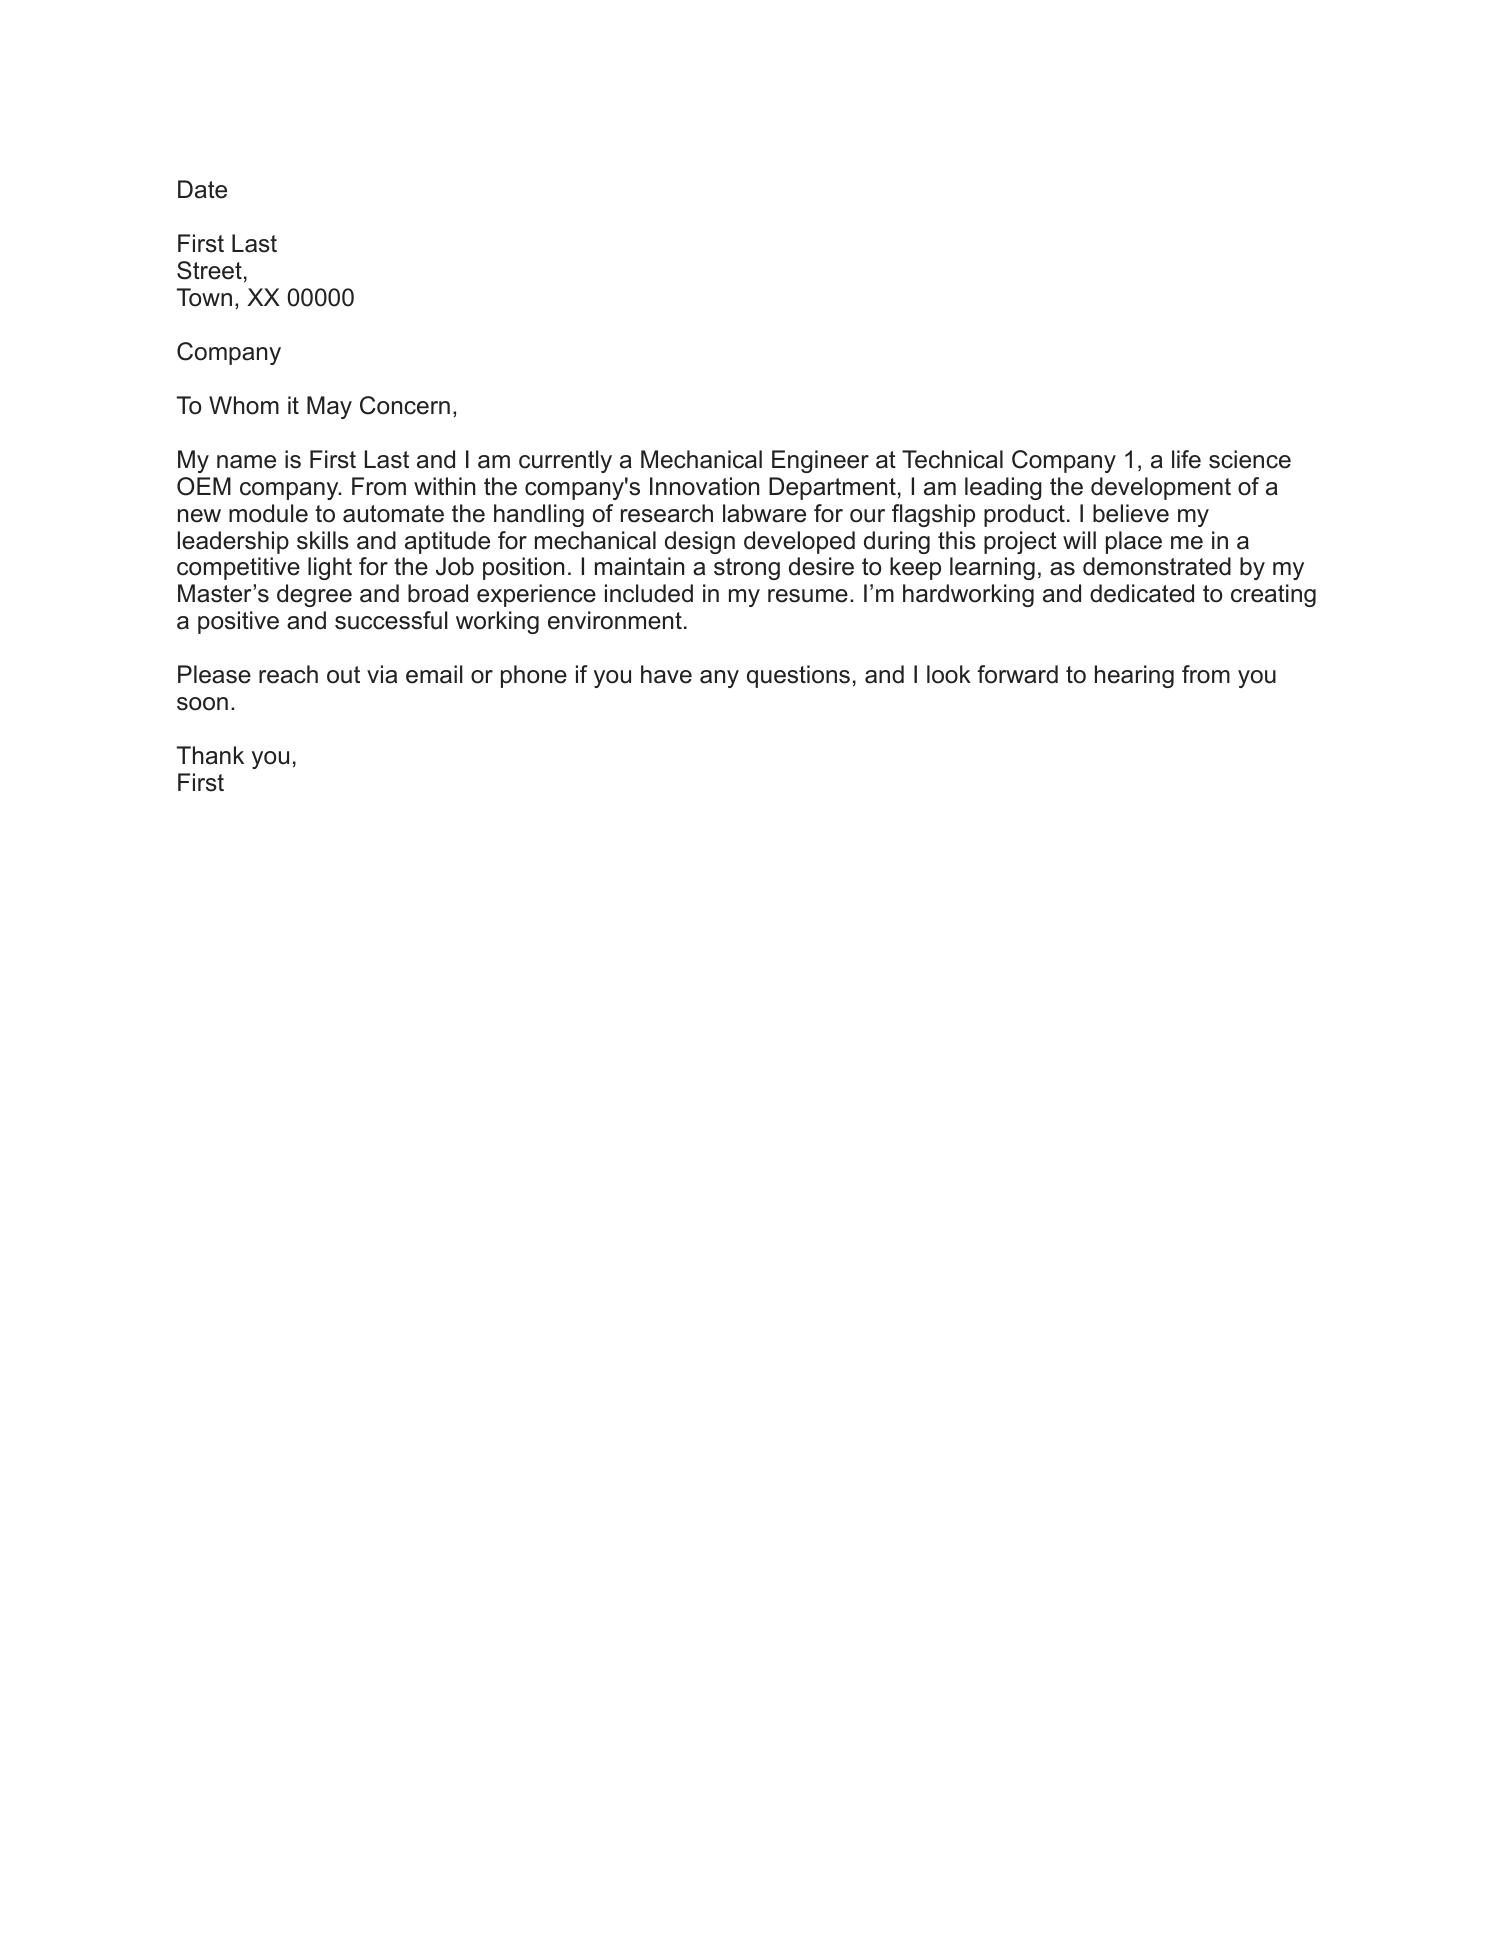 Blank Cover Letter.pdf | DocDroid